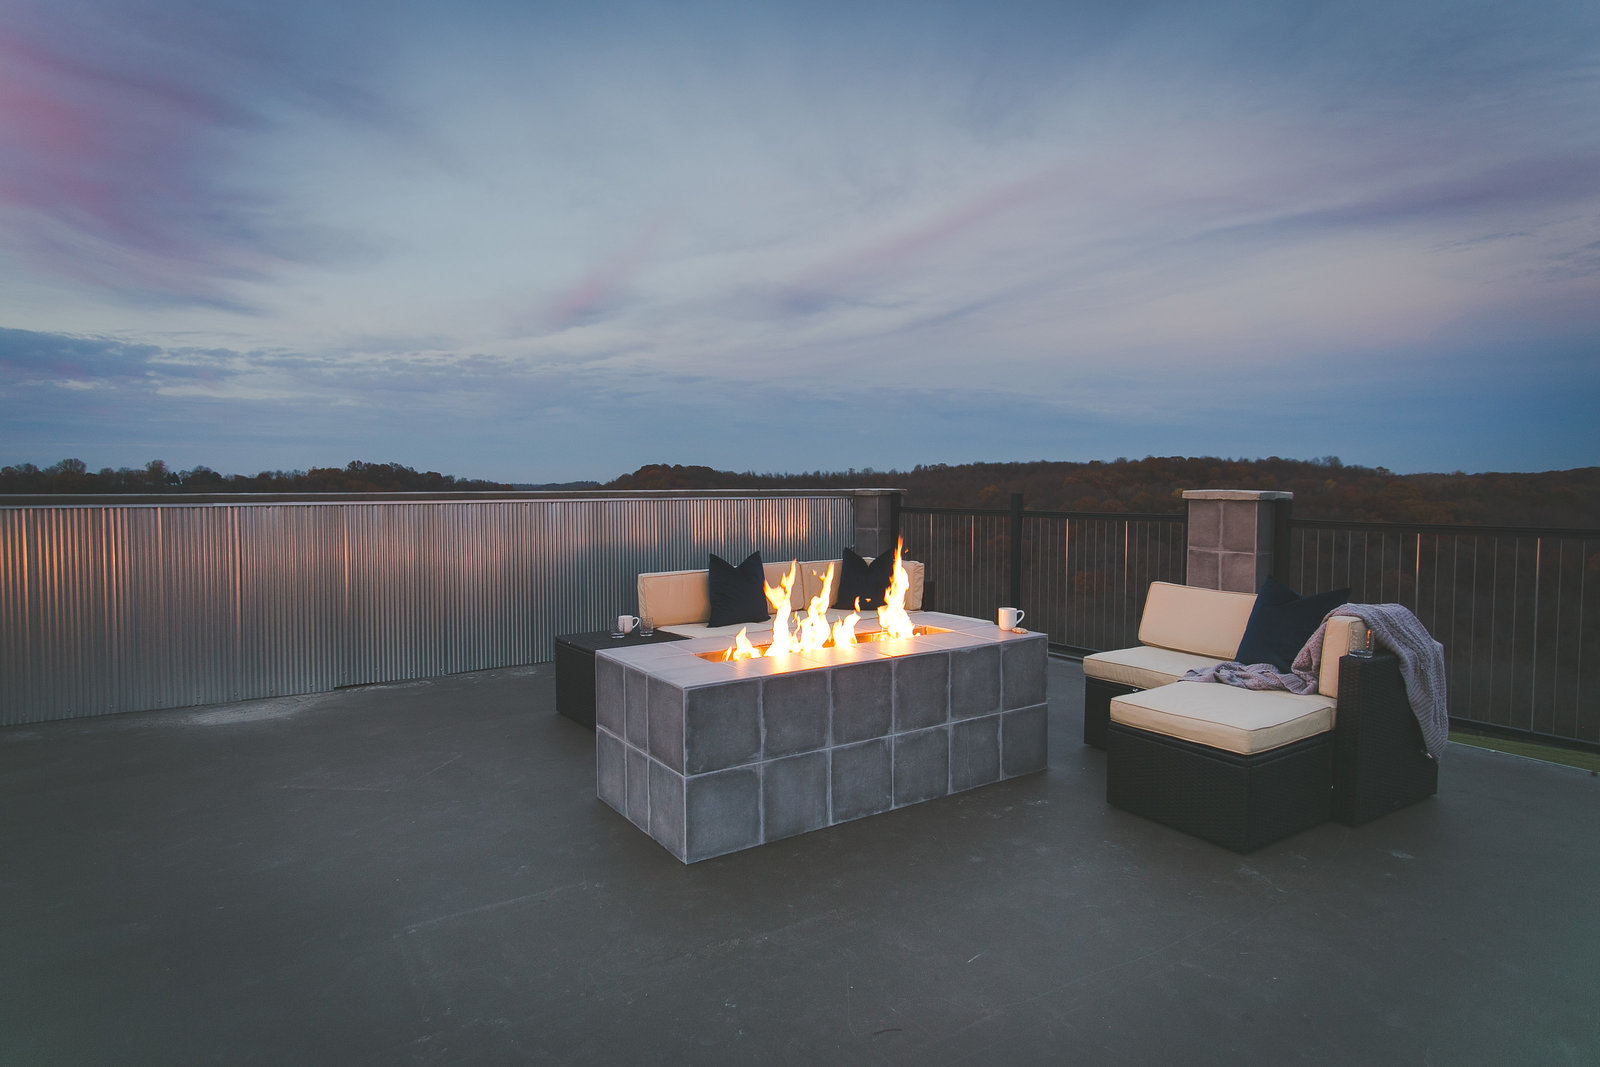 Modern Bnb rooftop design with custom cement gas fireplace. Industrial siding  and black metal railing surrounds the rooftop.